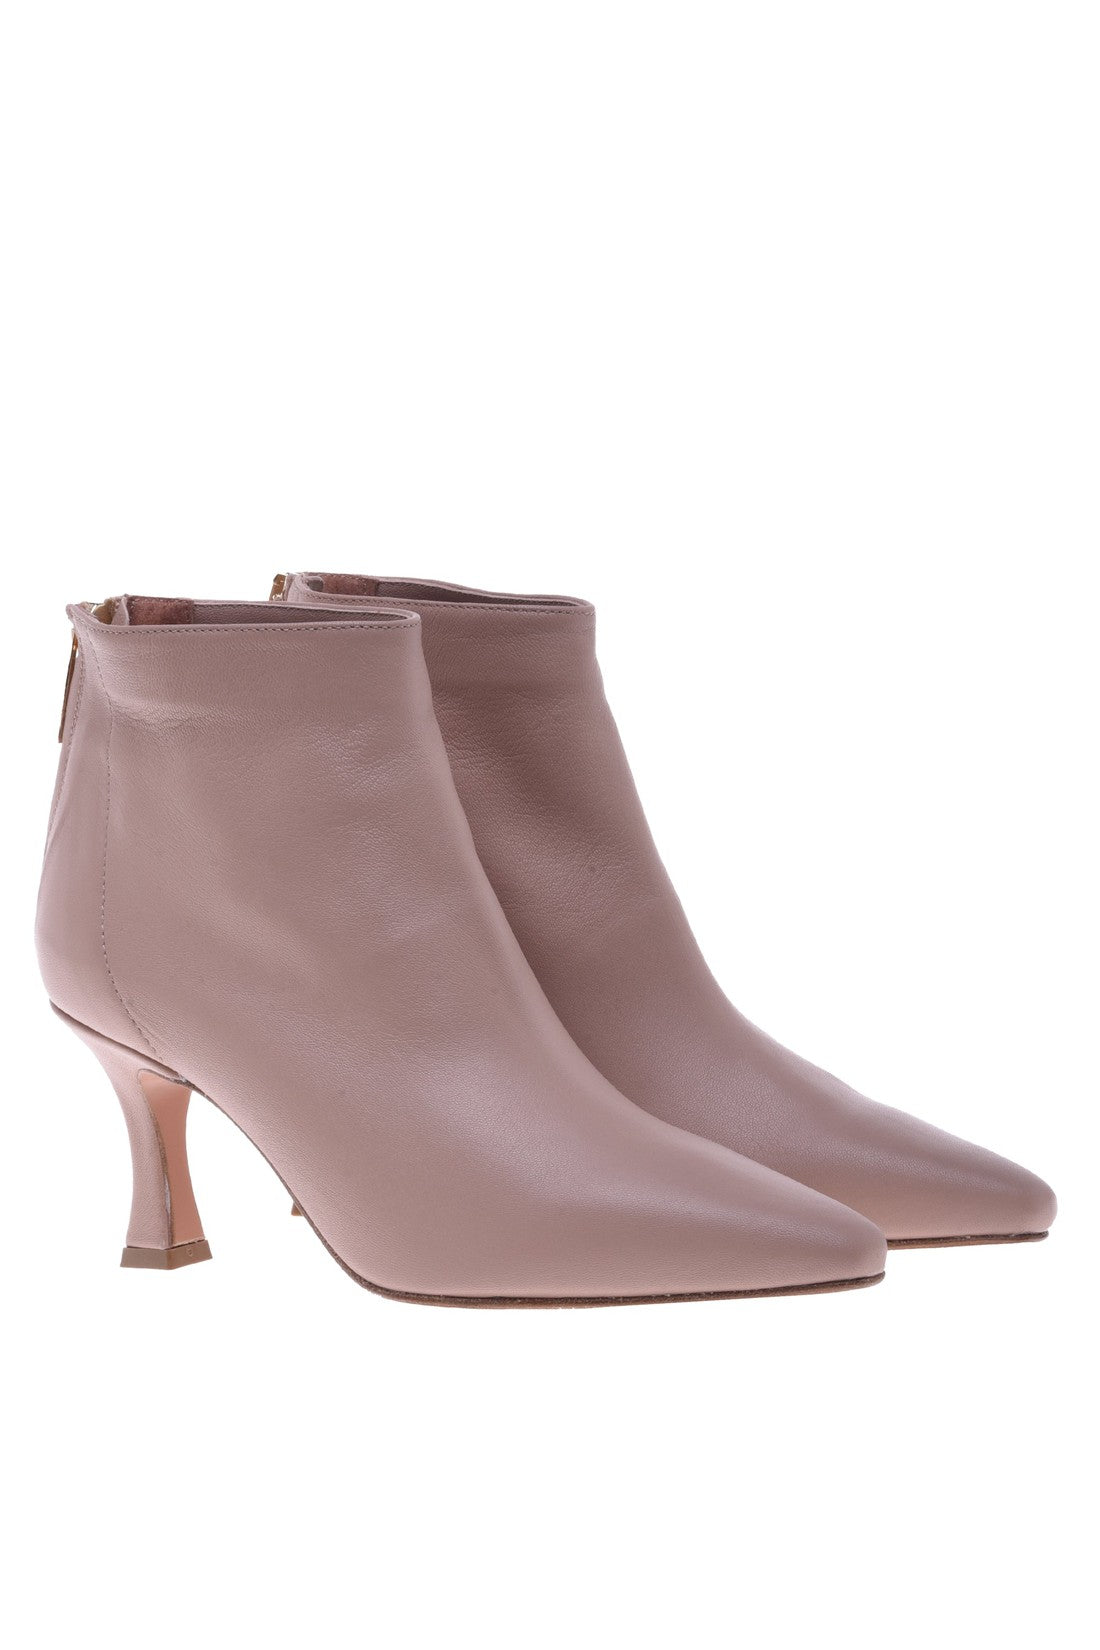 Ankle boot in nude nappa leather